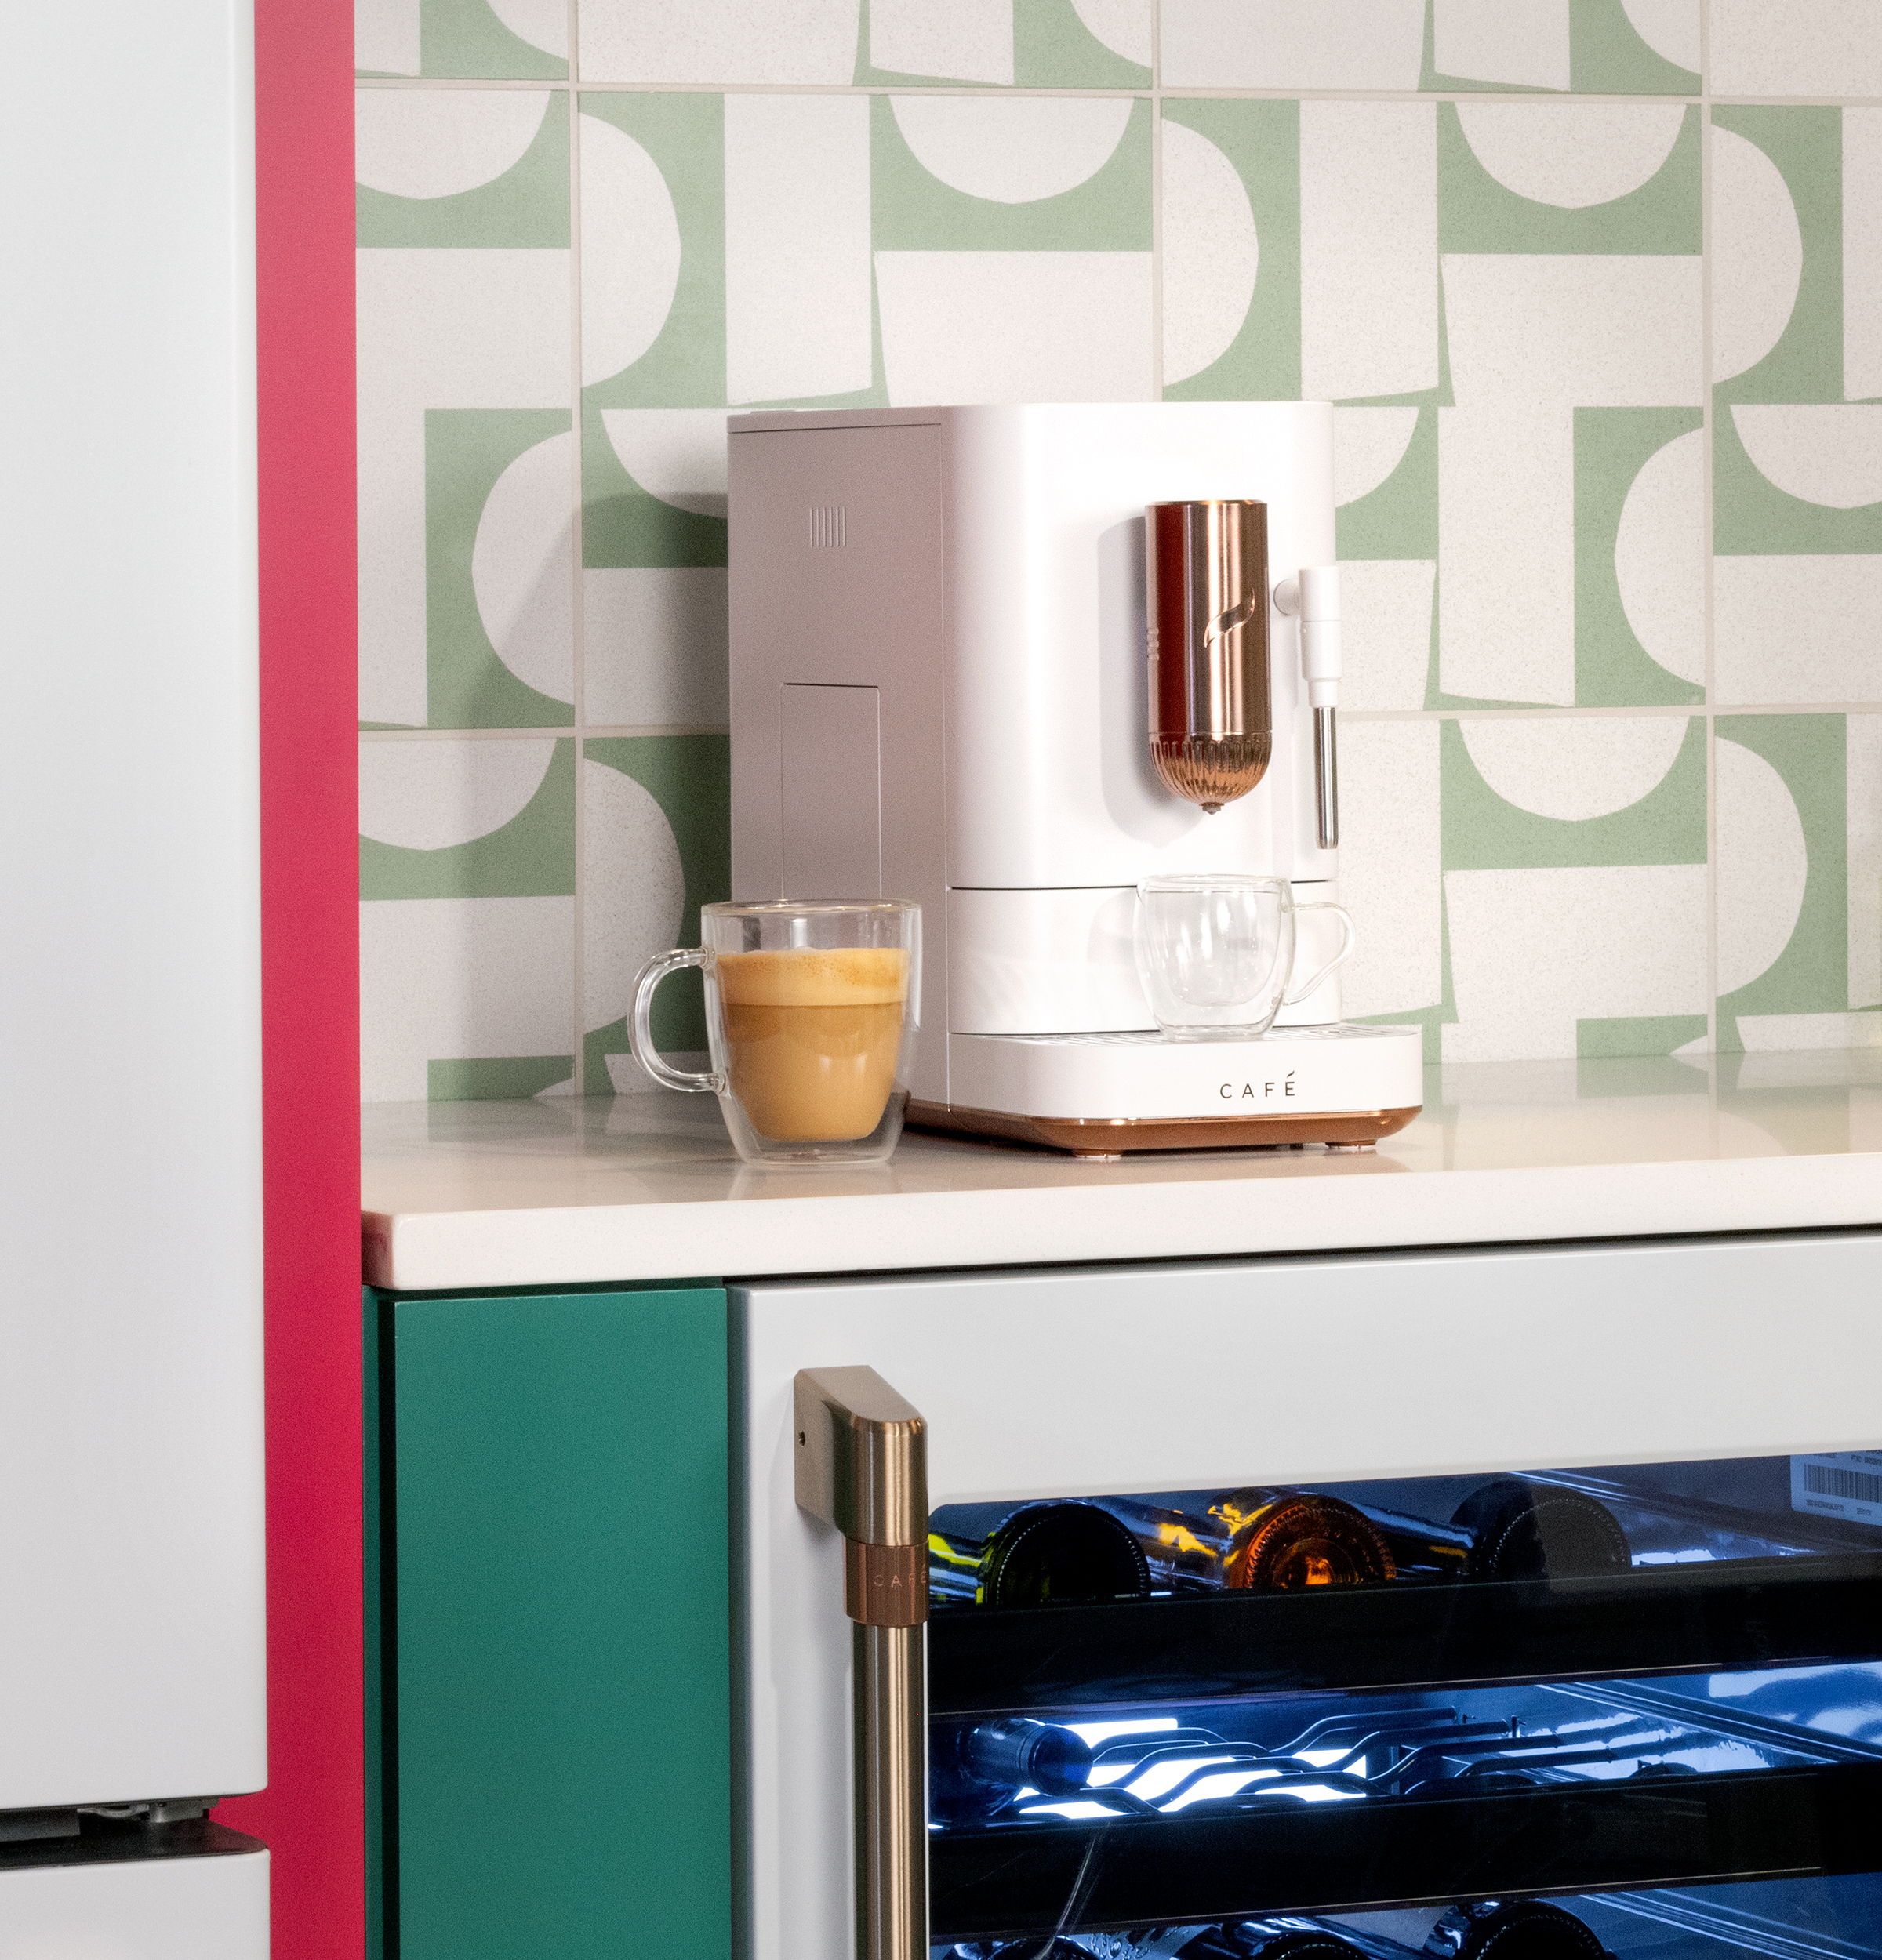 Two new coffee machines for Cafè (GE Appliances) - Home Appliances World